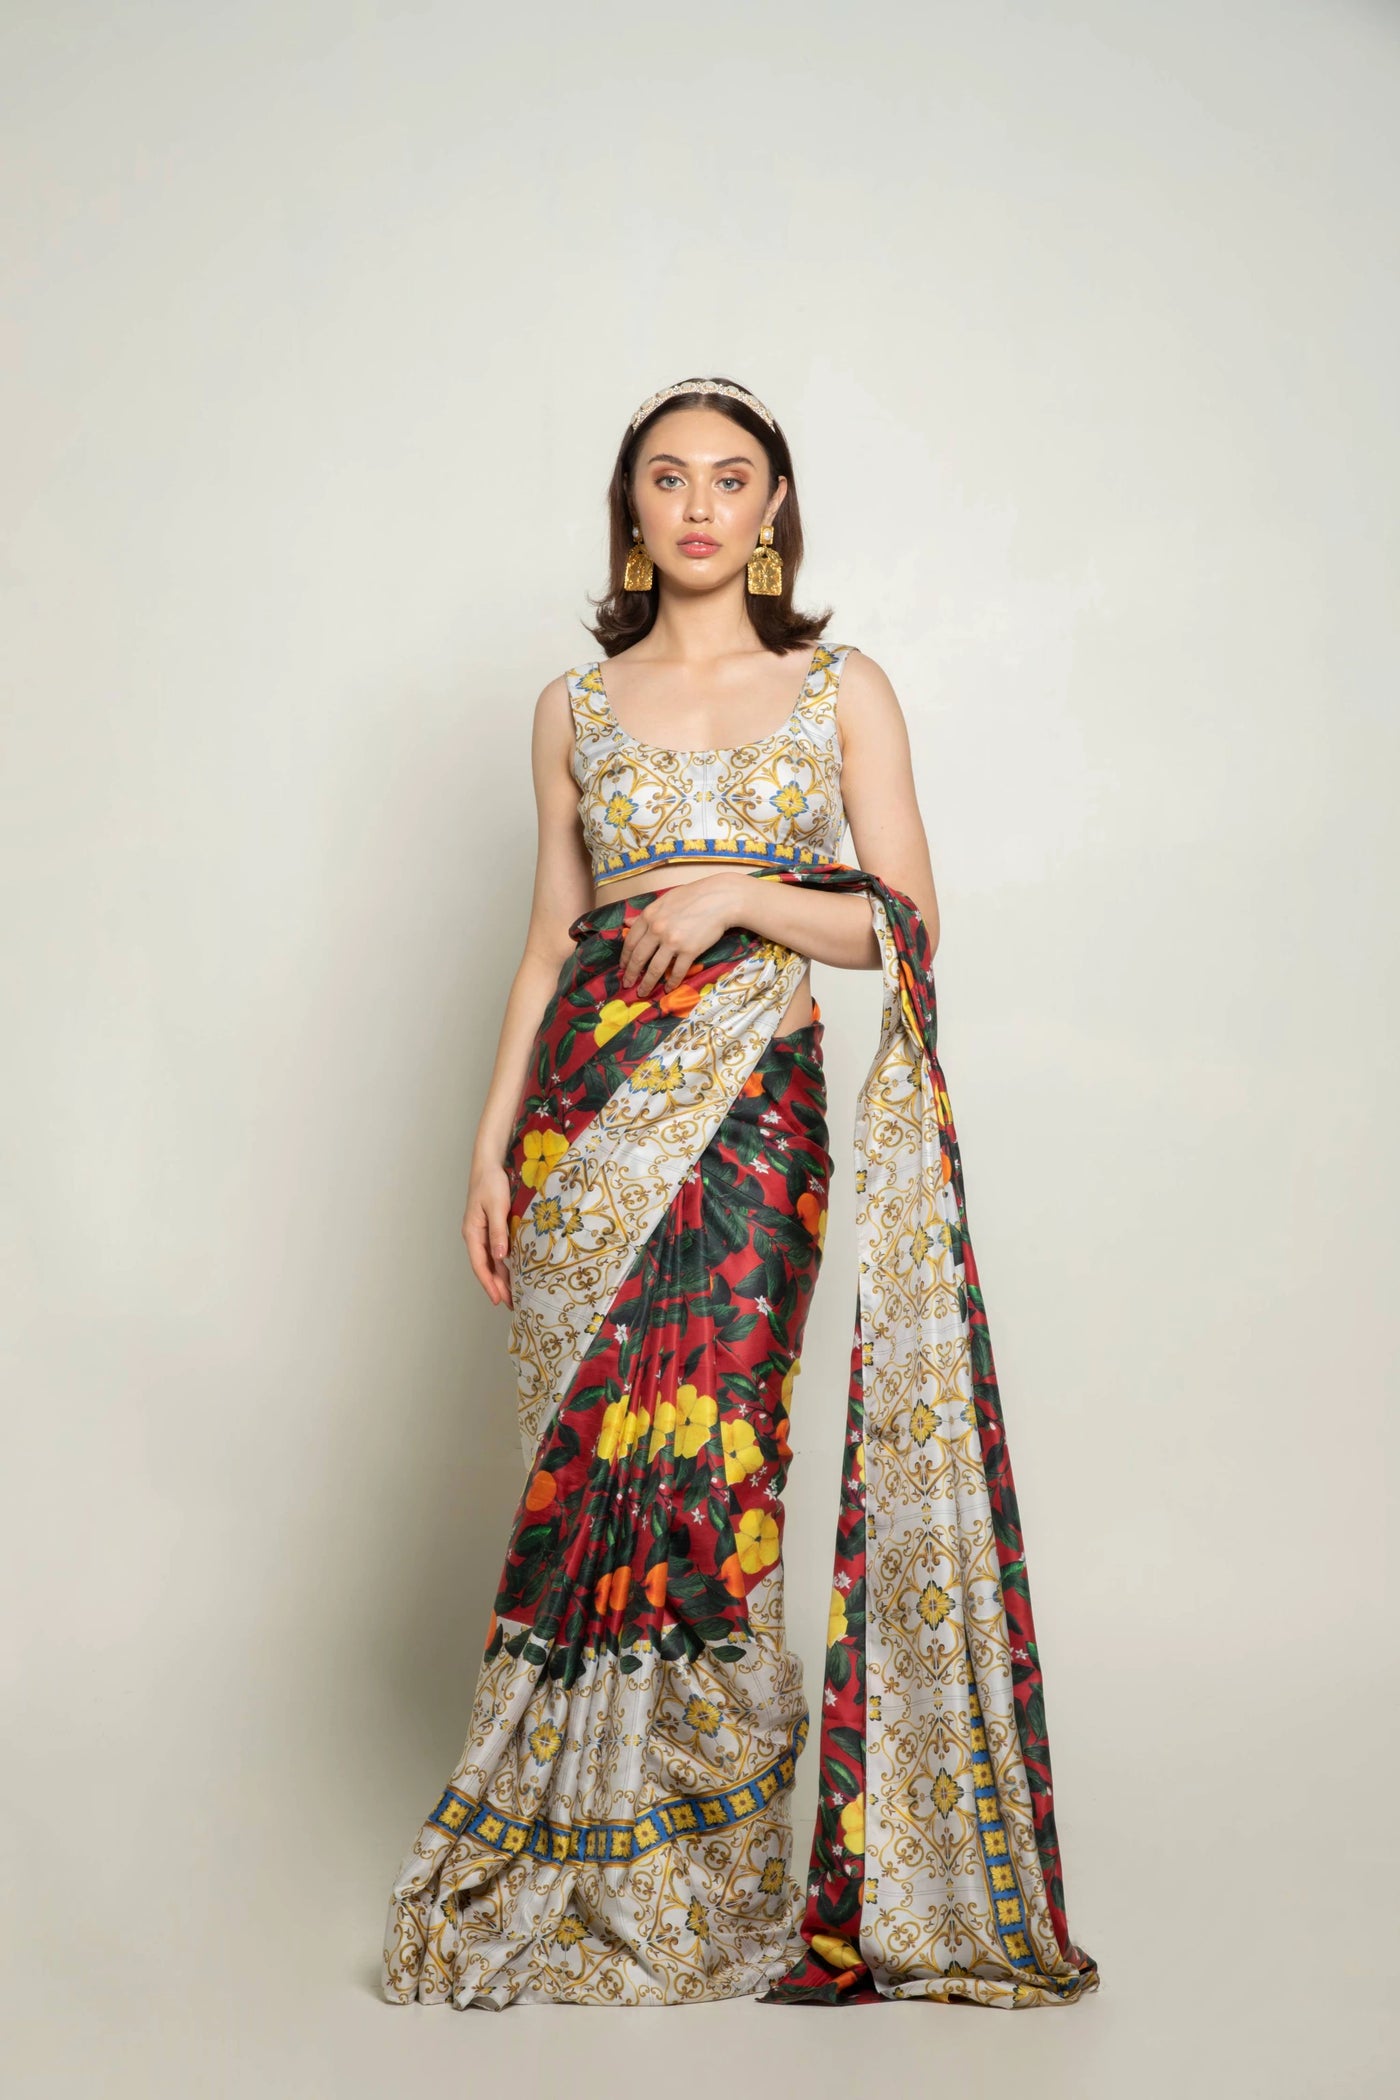 Saree Set in Floral Motif Indian Clothing in Denver, CO, Aurora, CO, Boulder, CO, Fort Collins, CO, Colorado Springs, CO, Parker, CO, Highlands Ranch, CO, Cherry Creek, CO, Centennial, CO, and Longmont, CO. NATIONWIDE SHIPPING USA- India Fashion X